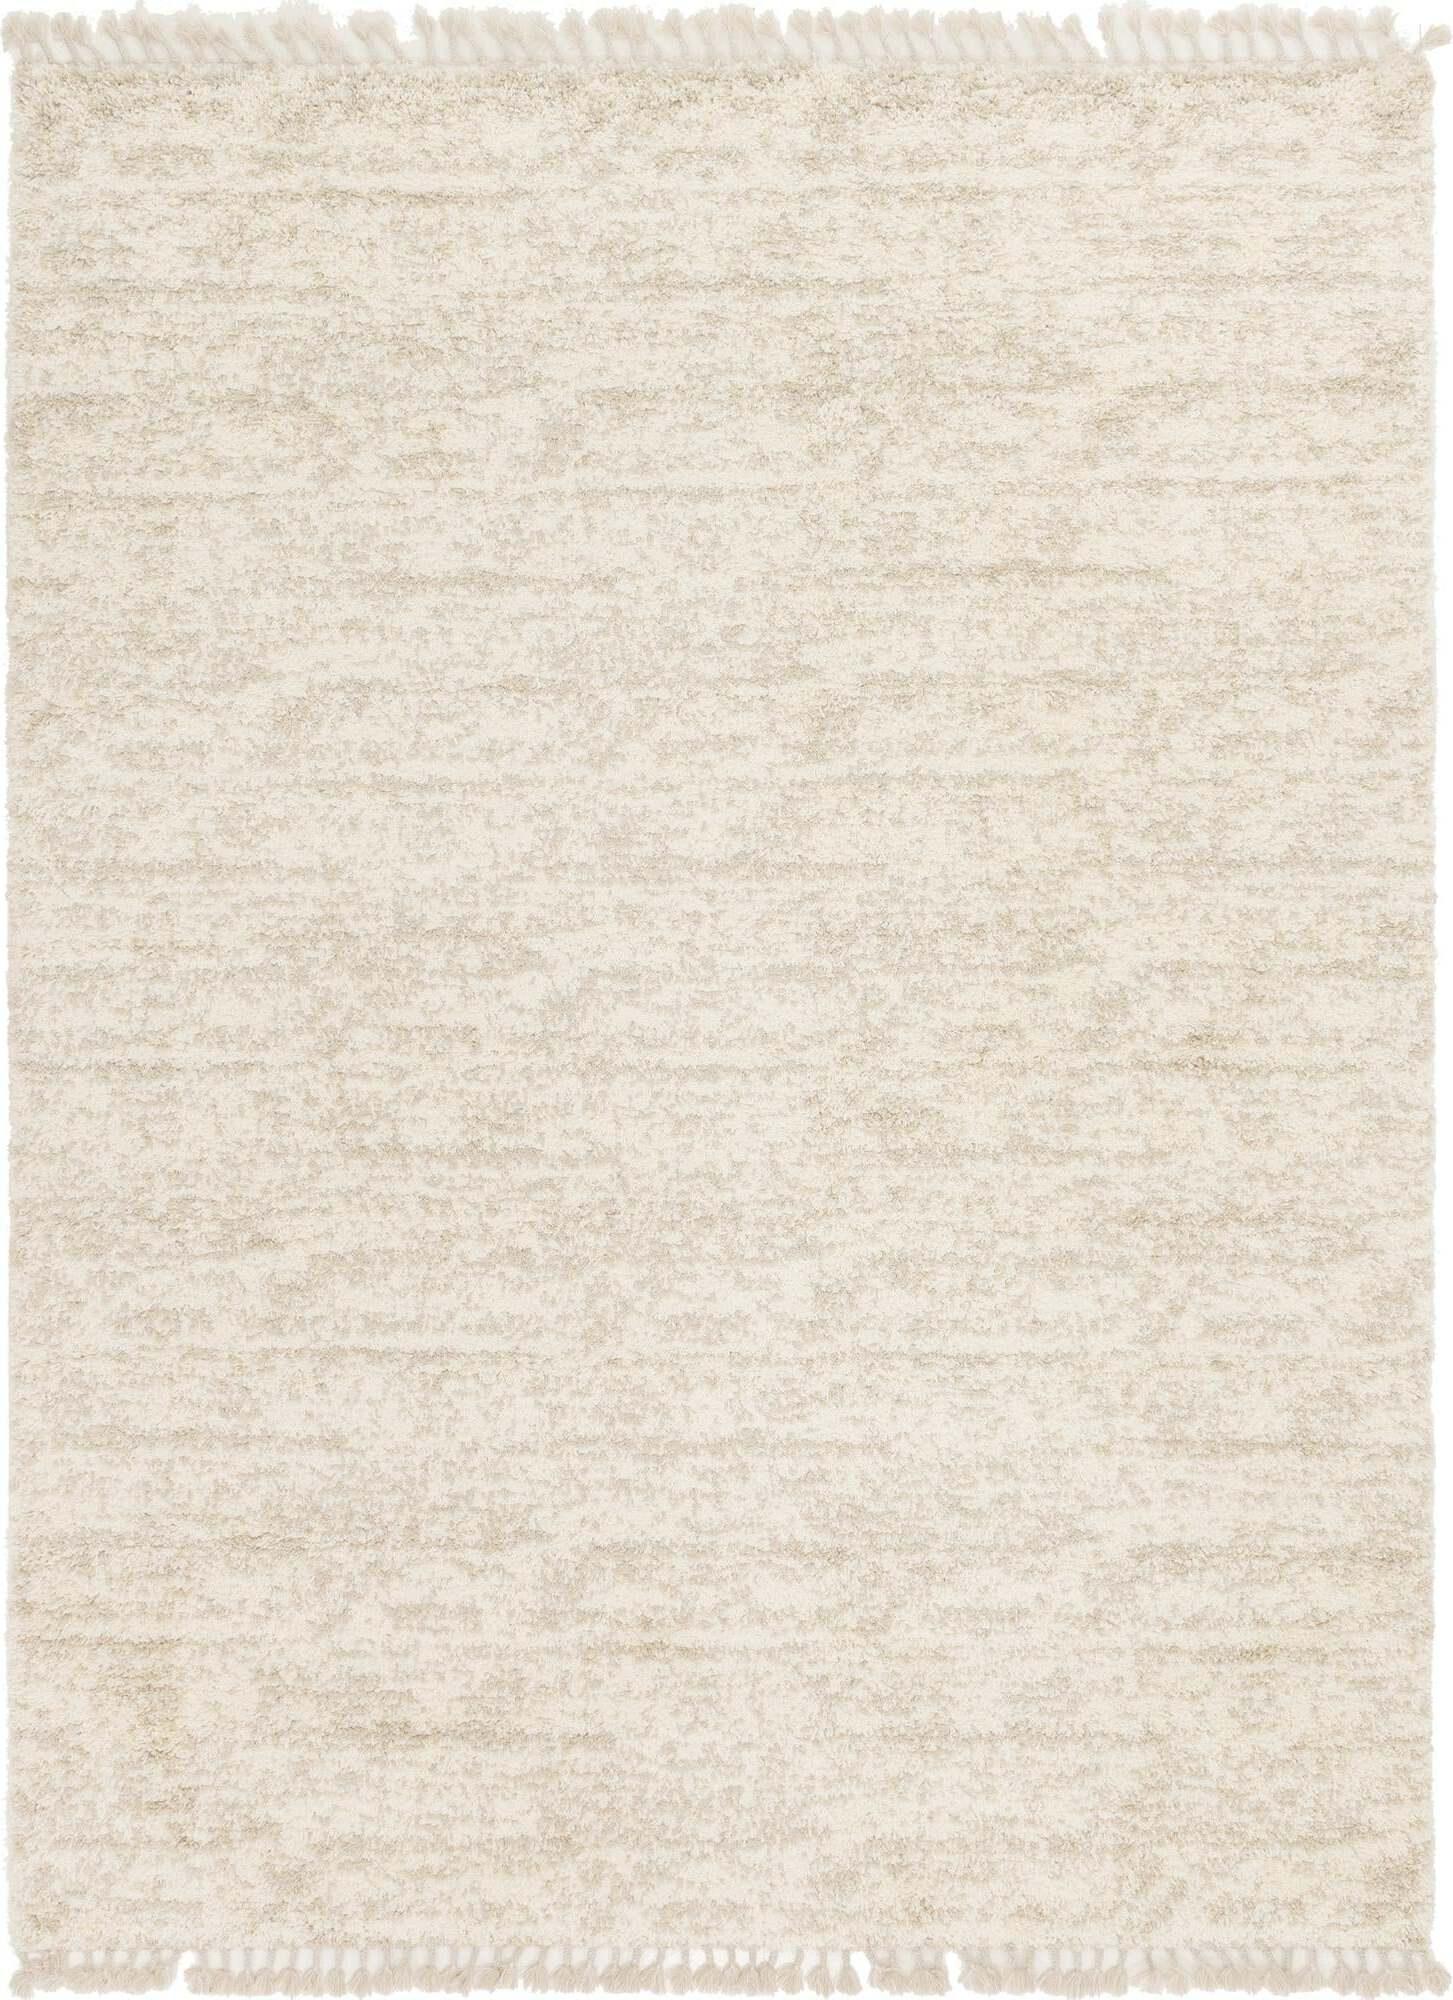 Unique Loom Indoor Rugs - Hygge Shag Abstract Rectangular 9x12 Rug Ivory & Tan